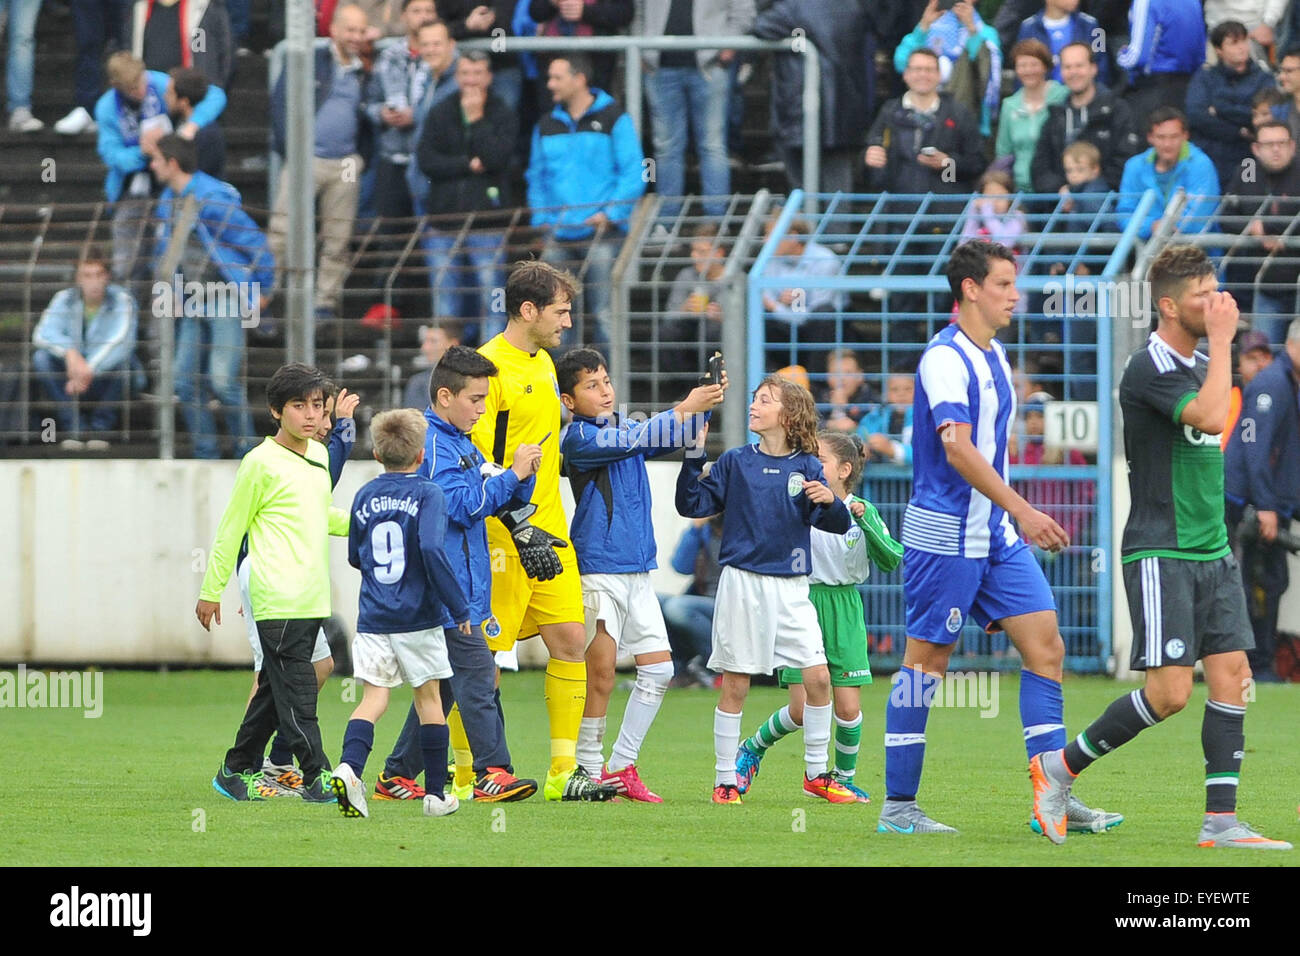 Gütersloh, Germany. 27th July, 2015. Realizou up this afternoon in Heidewaldstadium in Gutersloh a set of pre-epoch between the teams Fc Schalke 04 and Fc Porto. Casillas. Credit:  Atlantico Press/Alamy Live News Stock Photo